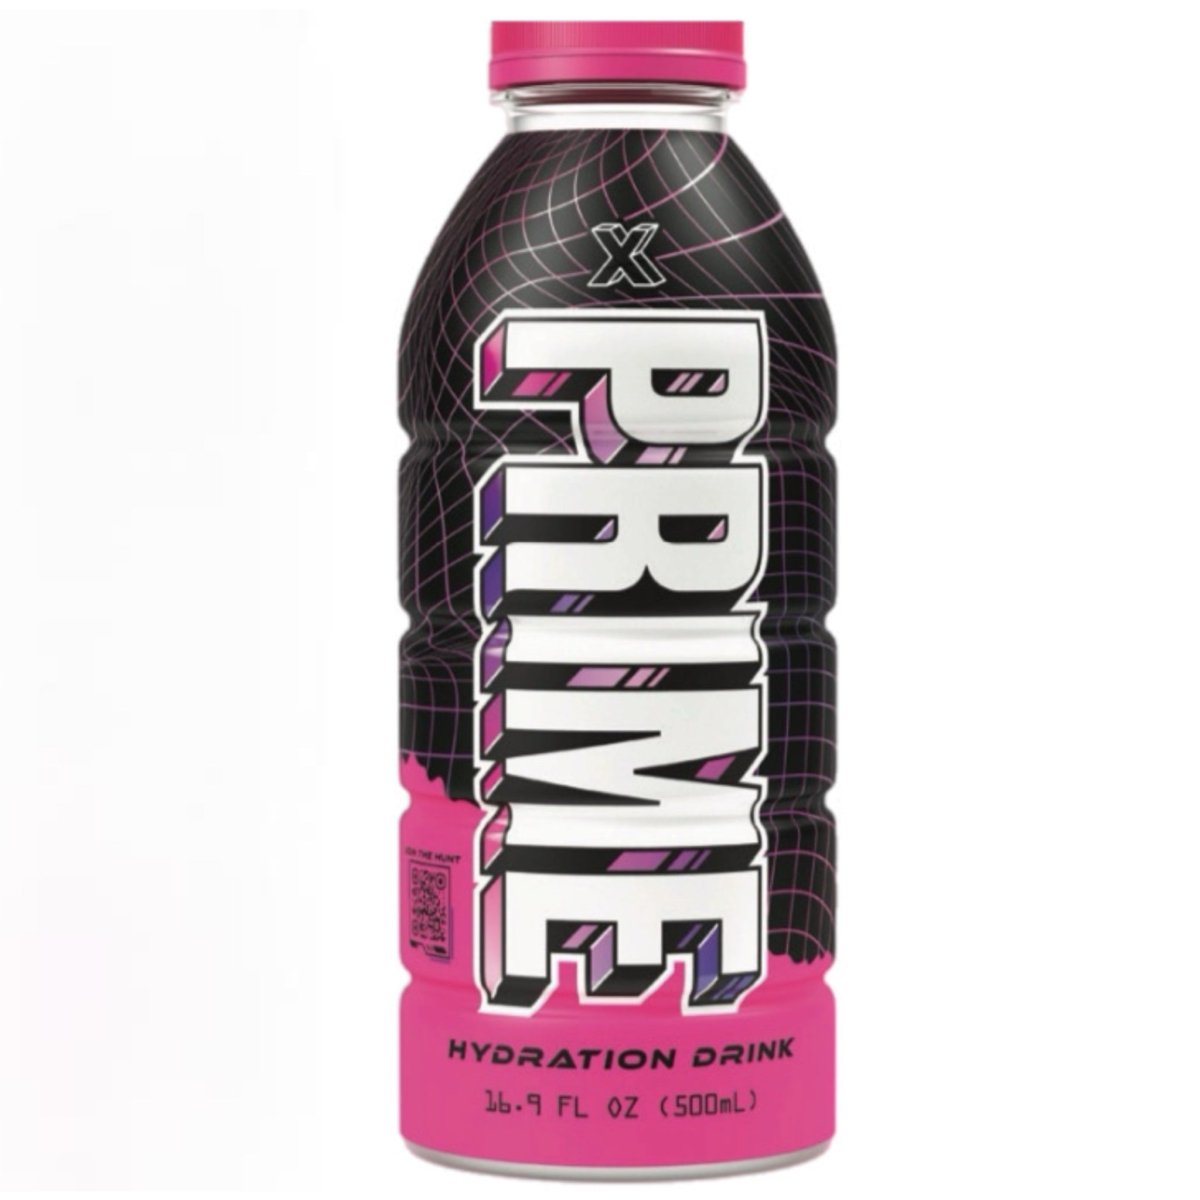 (Pre-Order) Prime Hydration Pink ‘X’ Limited Edition 500ml - Candy Mail UK